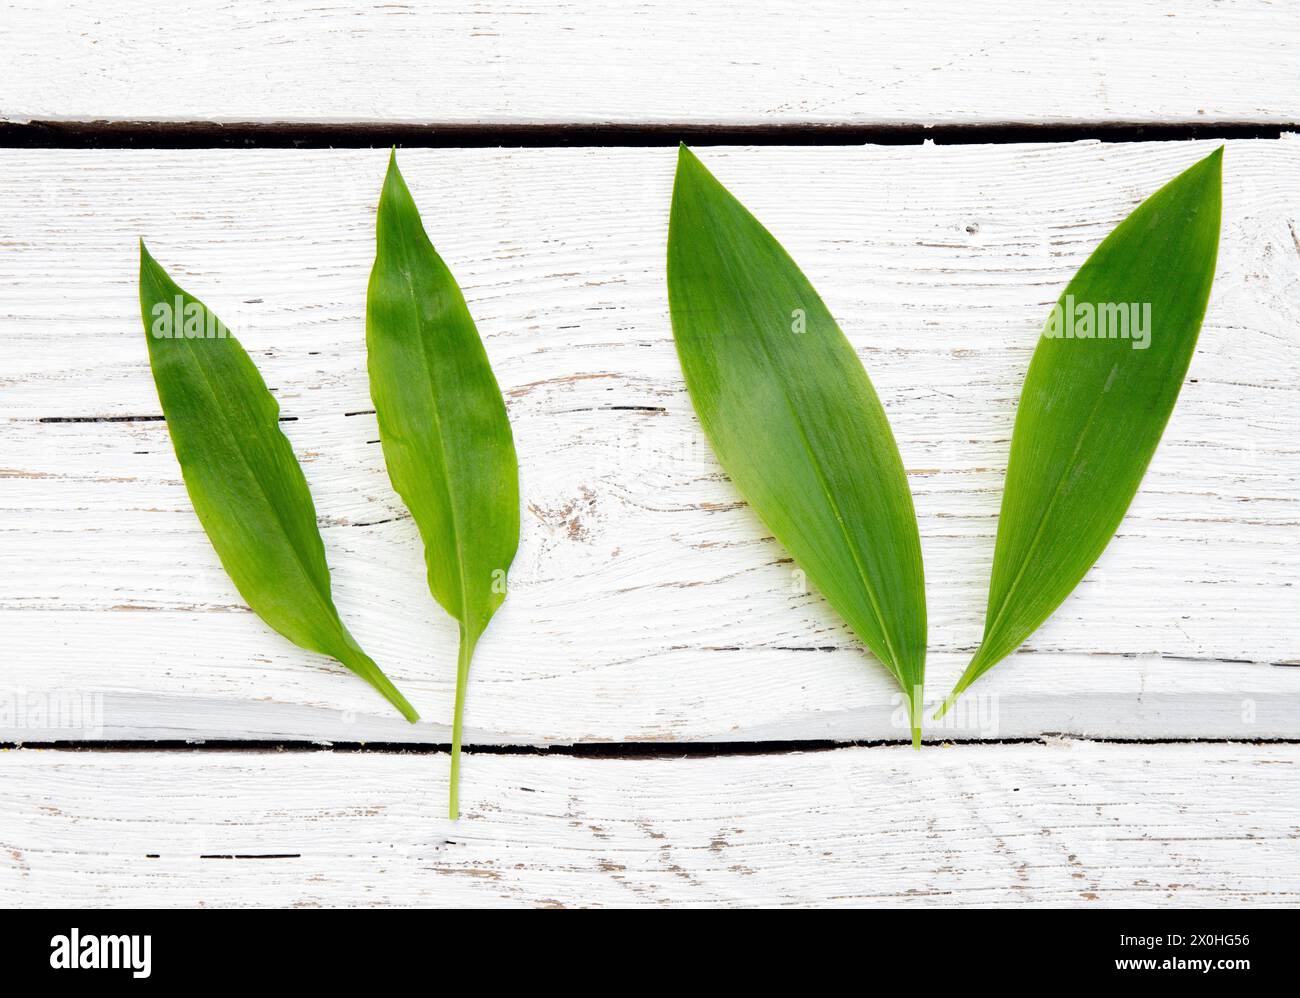 Two very similar spring leaves. On the left is tasty edible Allium ursinum known as wild garlic and on the right is very poisonous Convallaria majalis Stock Photo